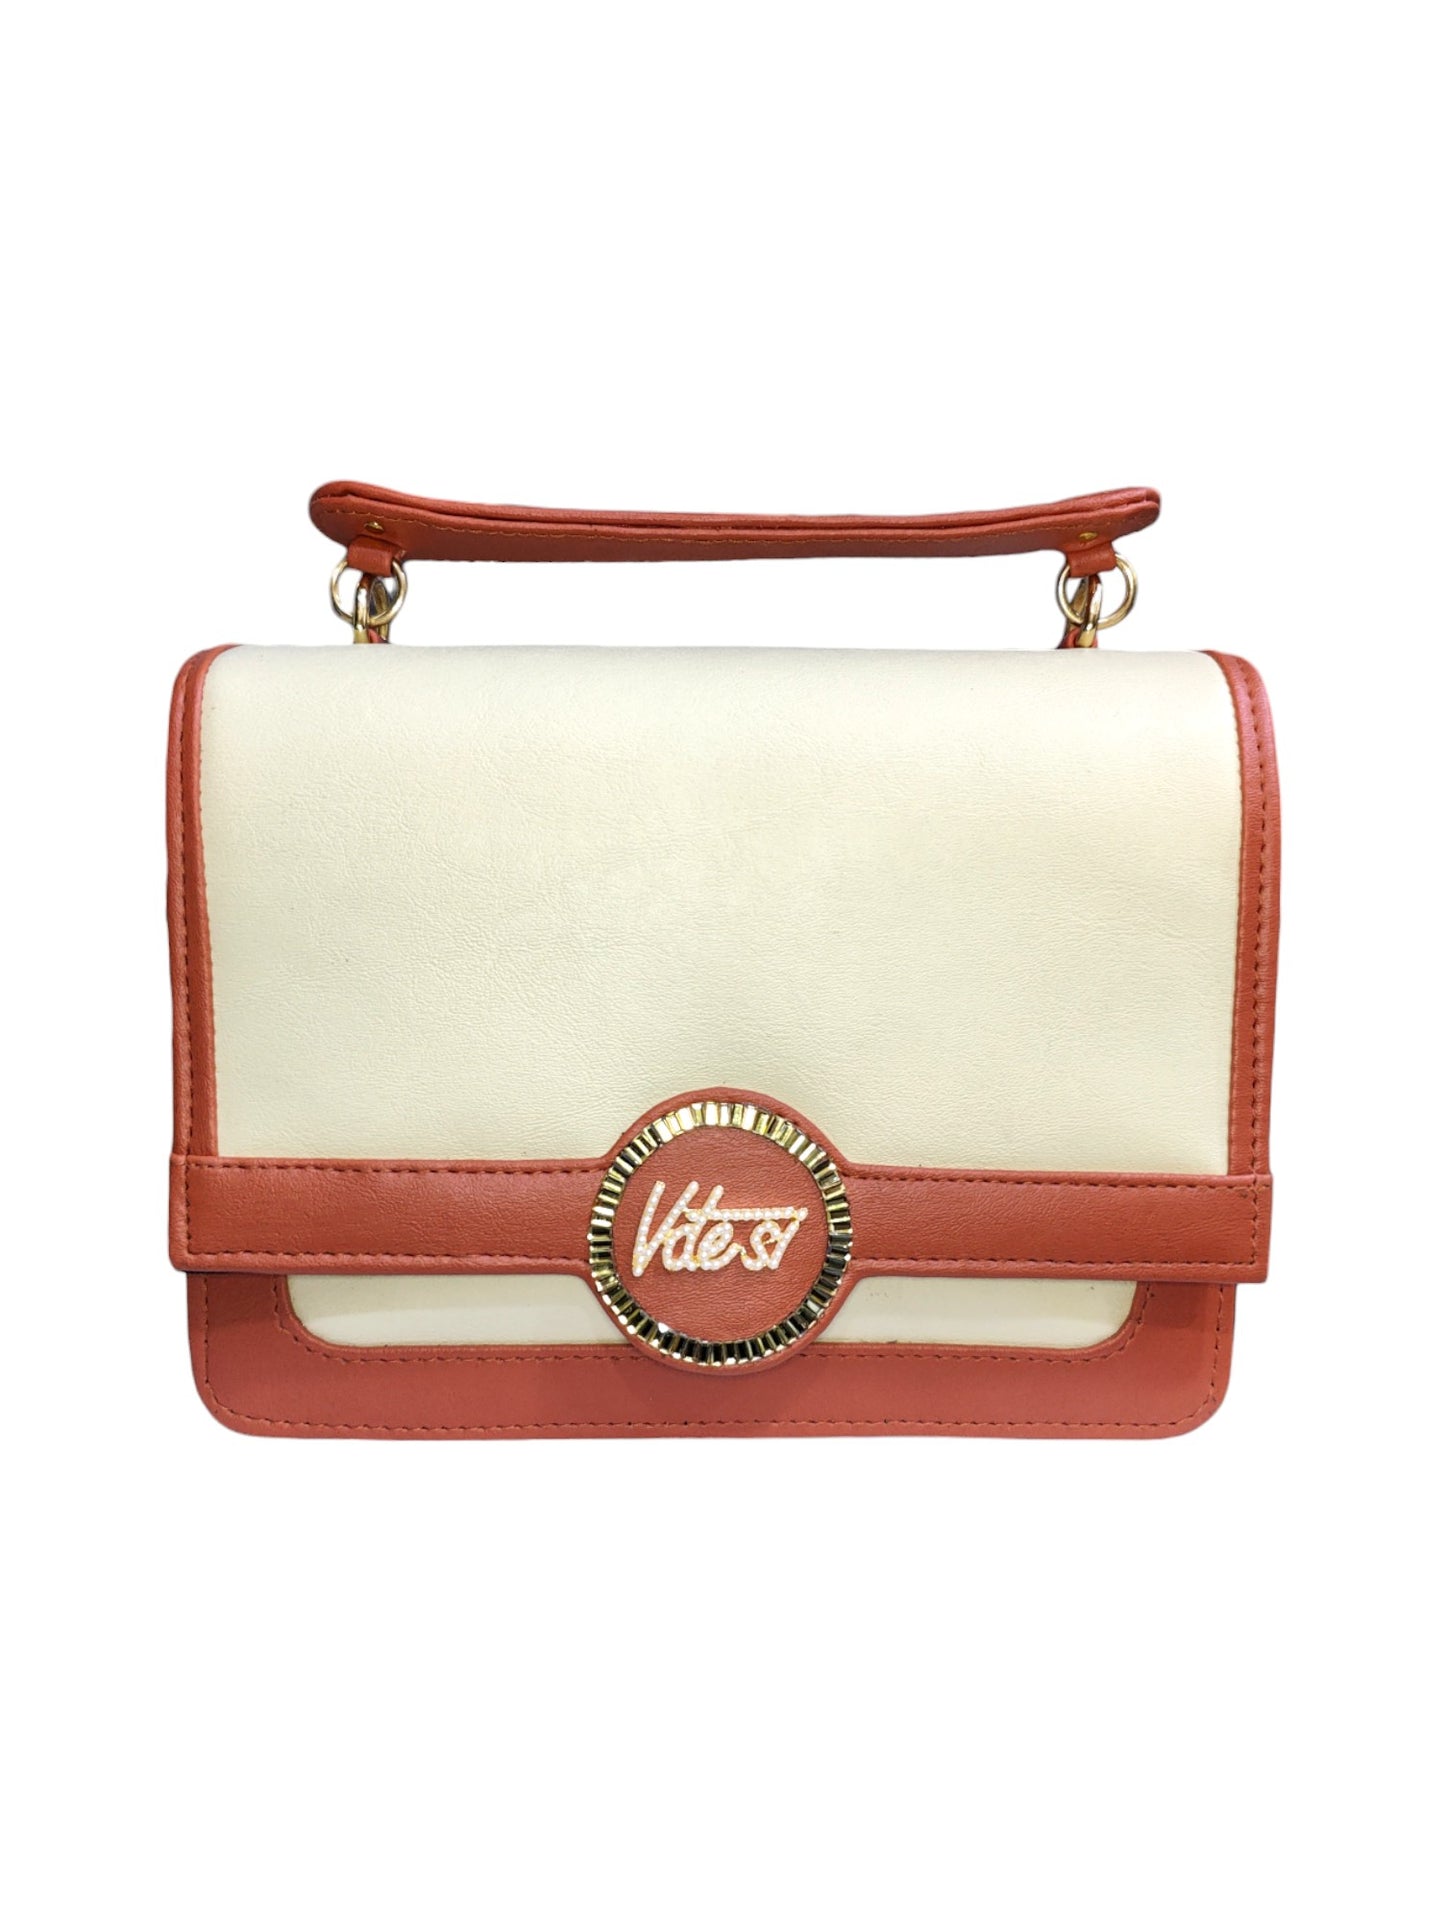 With its sleek top handle and elegant flip closure, this bag is the epitome of style and sophistication.